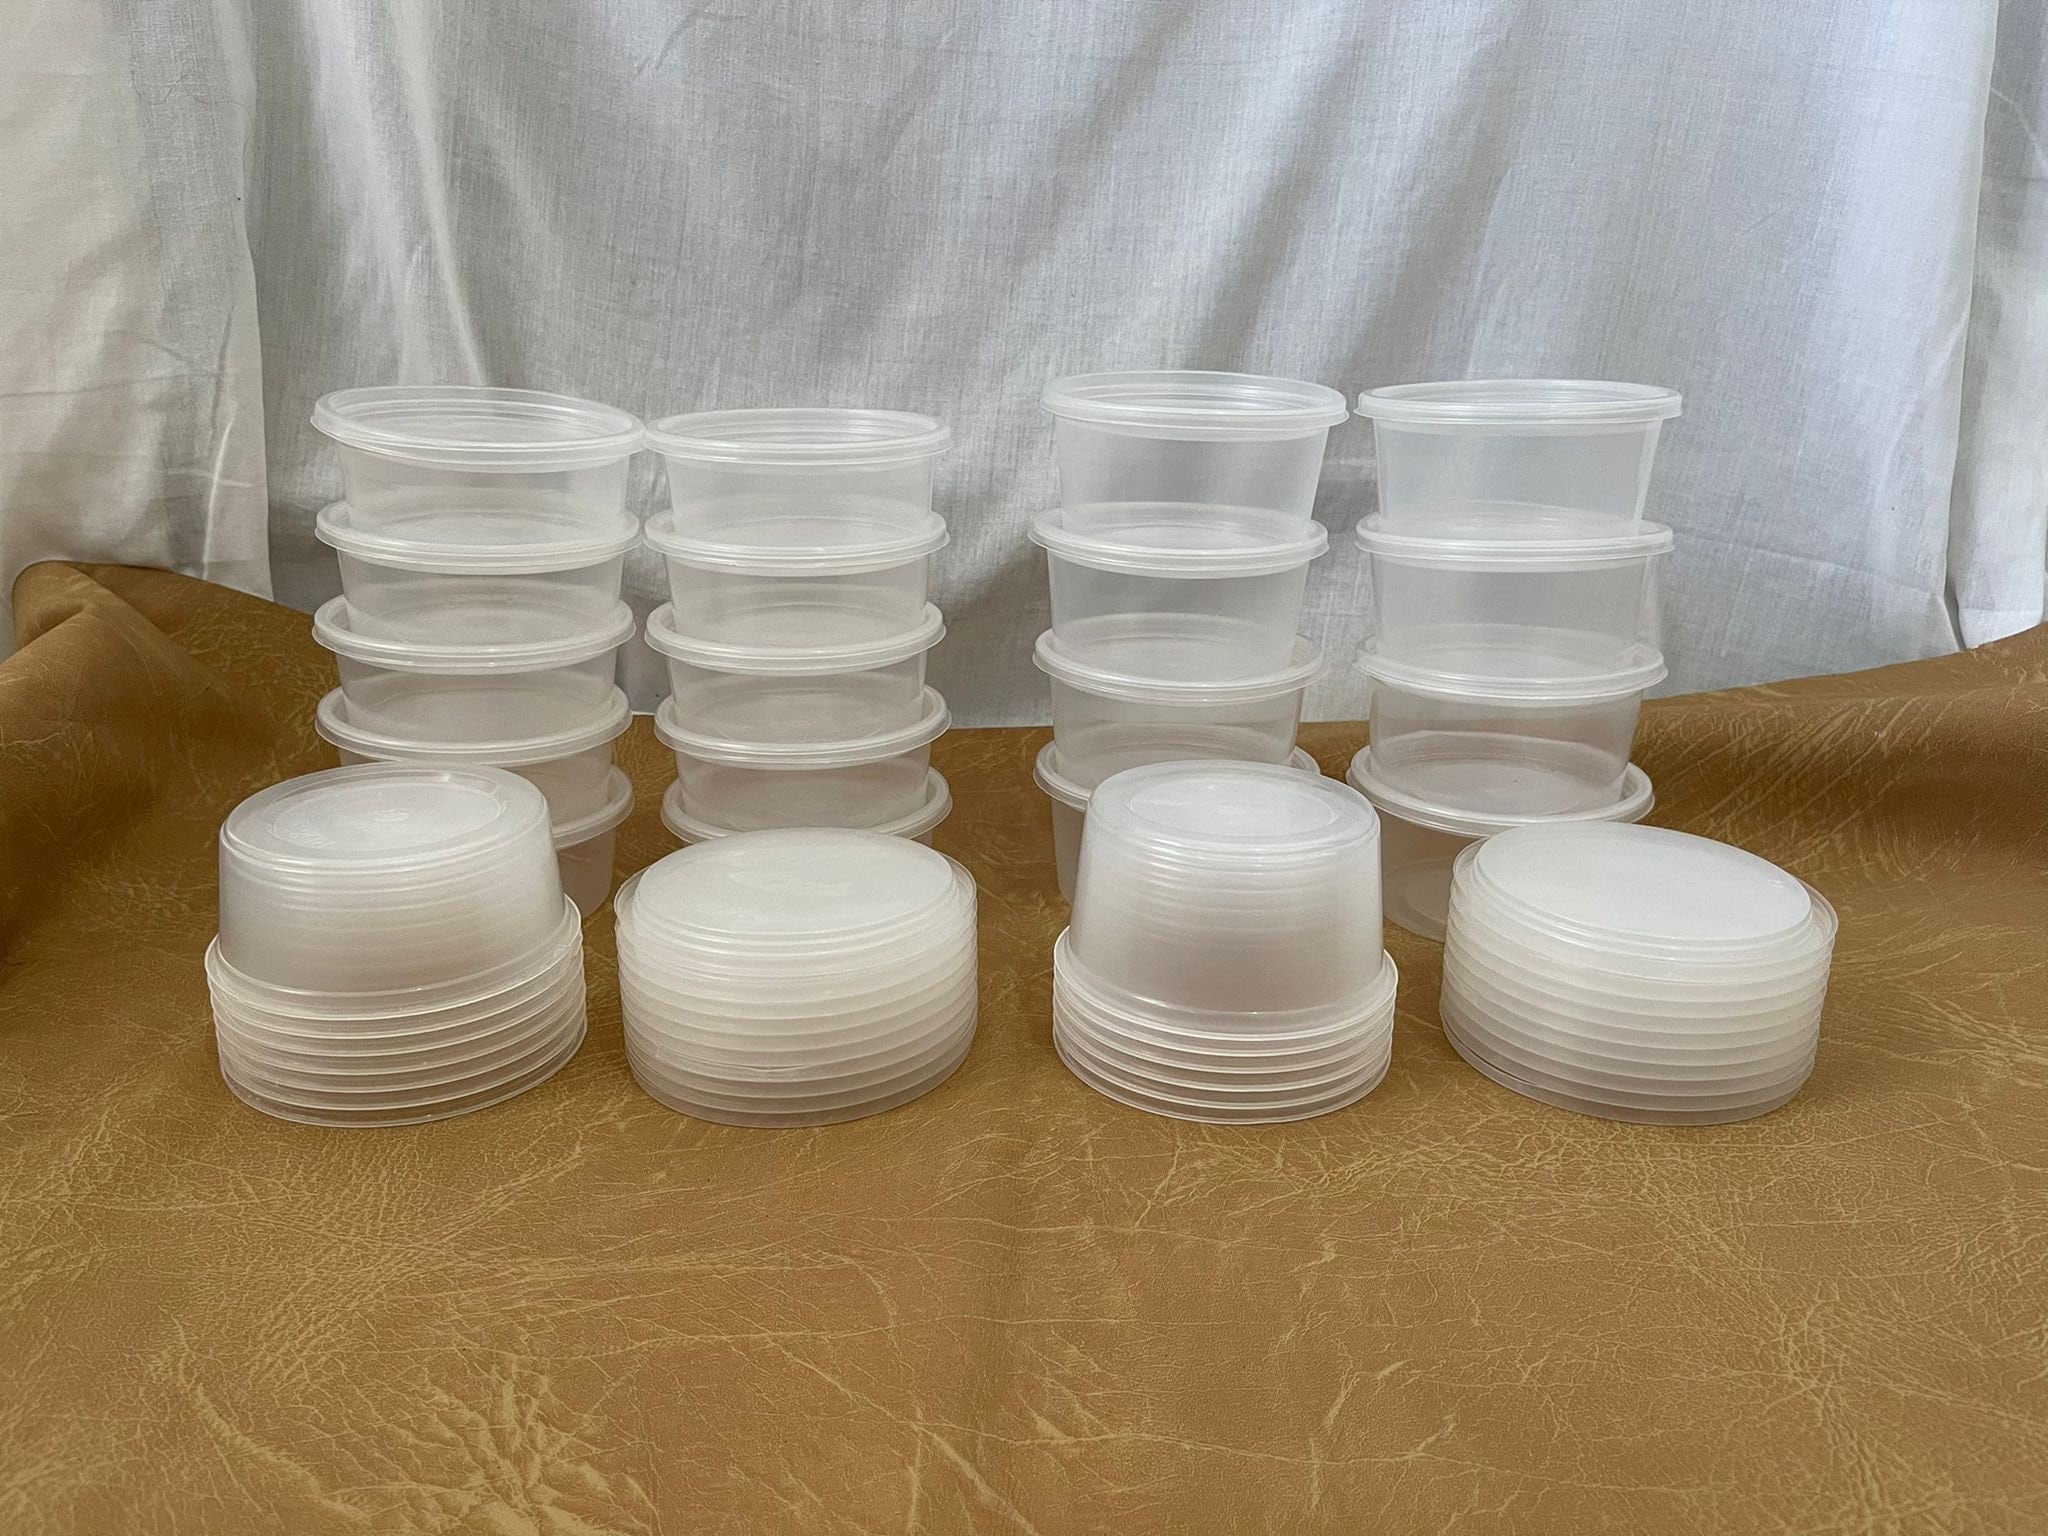 6oz,8oz,12oz,16oz,32oz Plastic Containers With Lids Slime Containers Craft  Supplies Kids Kraft Storage Containers DIY Slime 